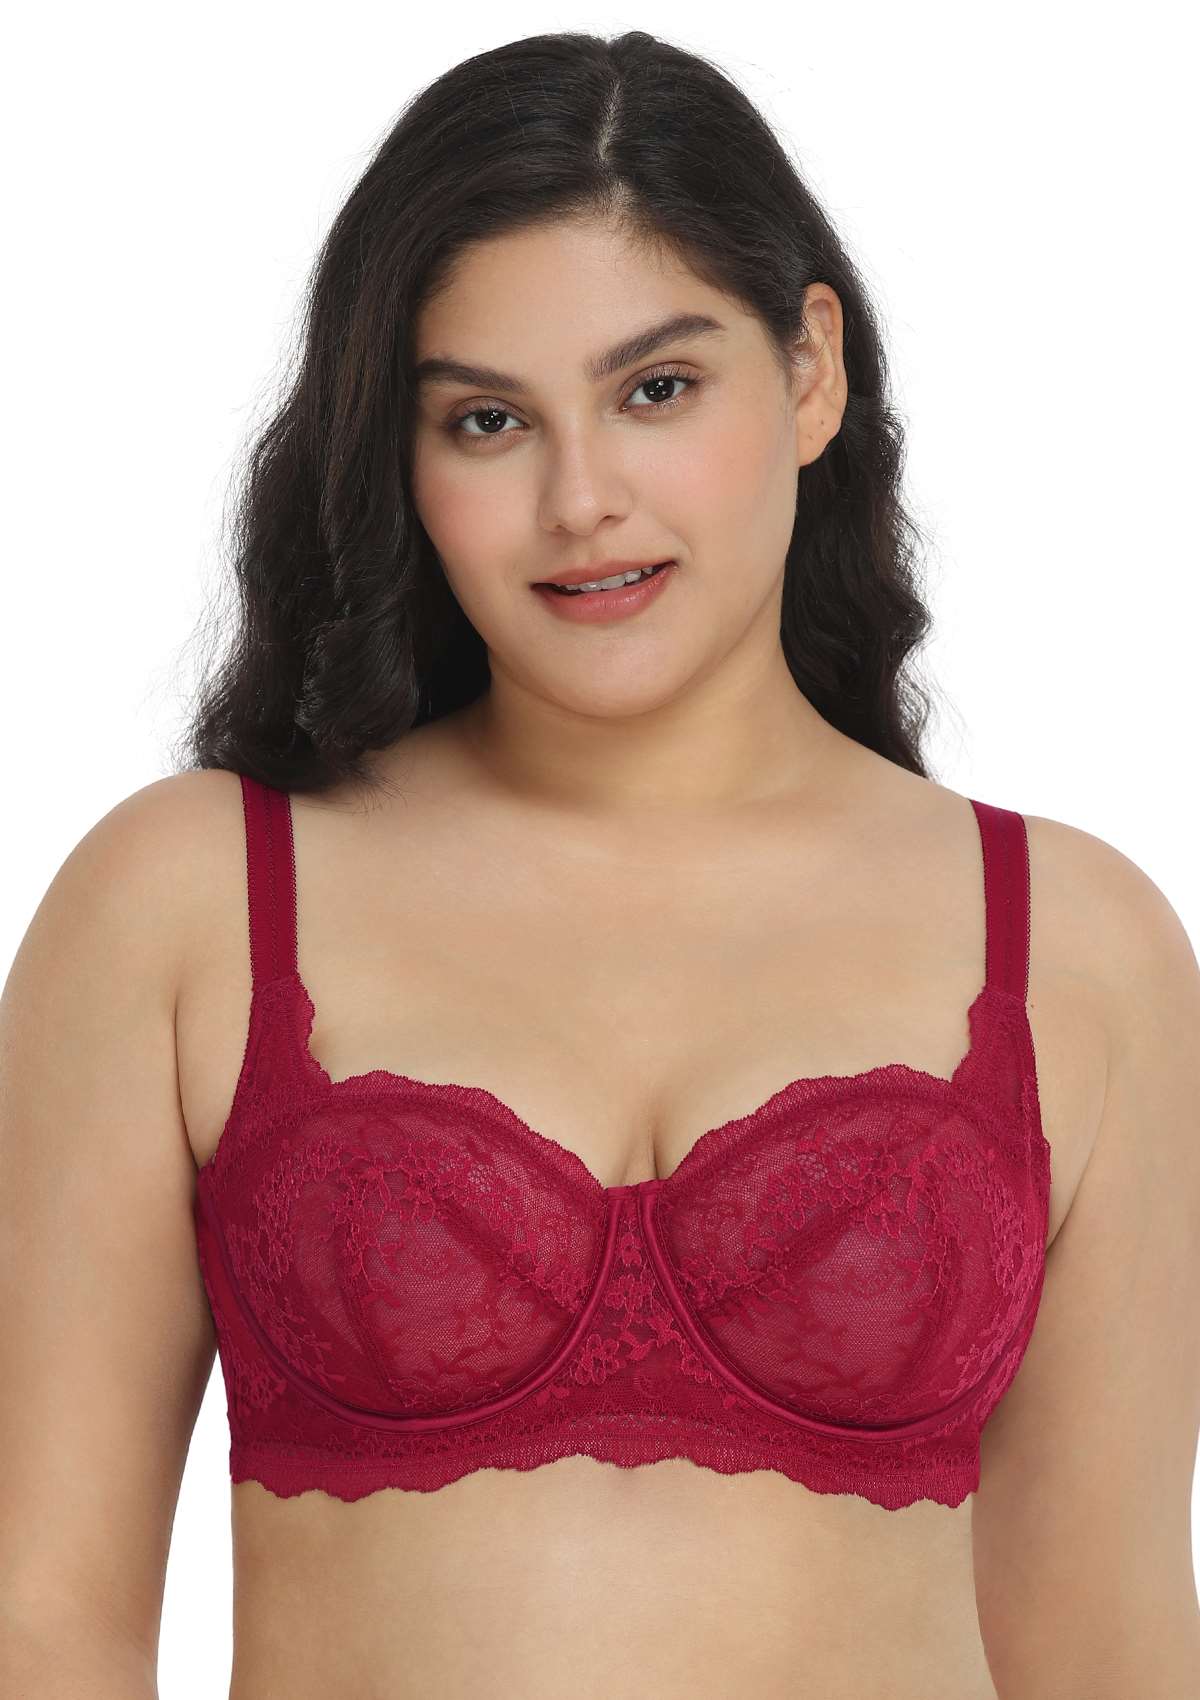 HSIA I Do Floral Lace Bridal Balconette Beautiful Bra For Special Day - Burgundy / 42 / D